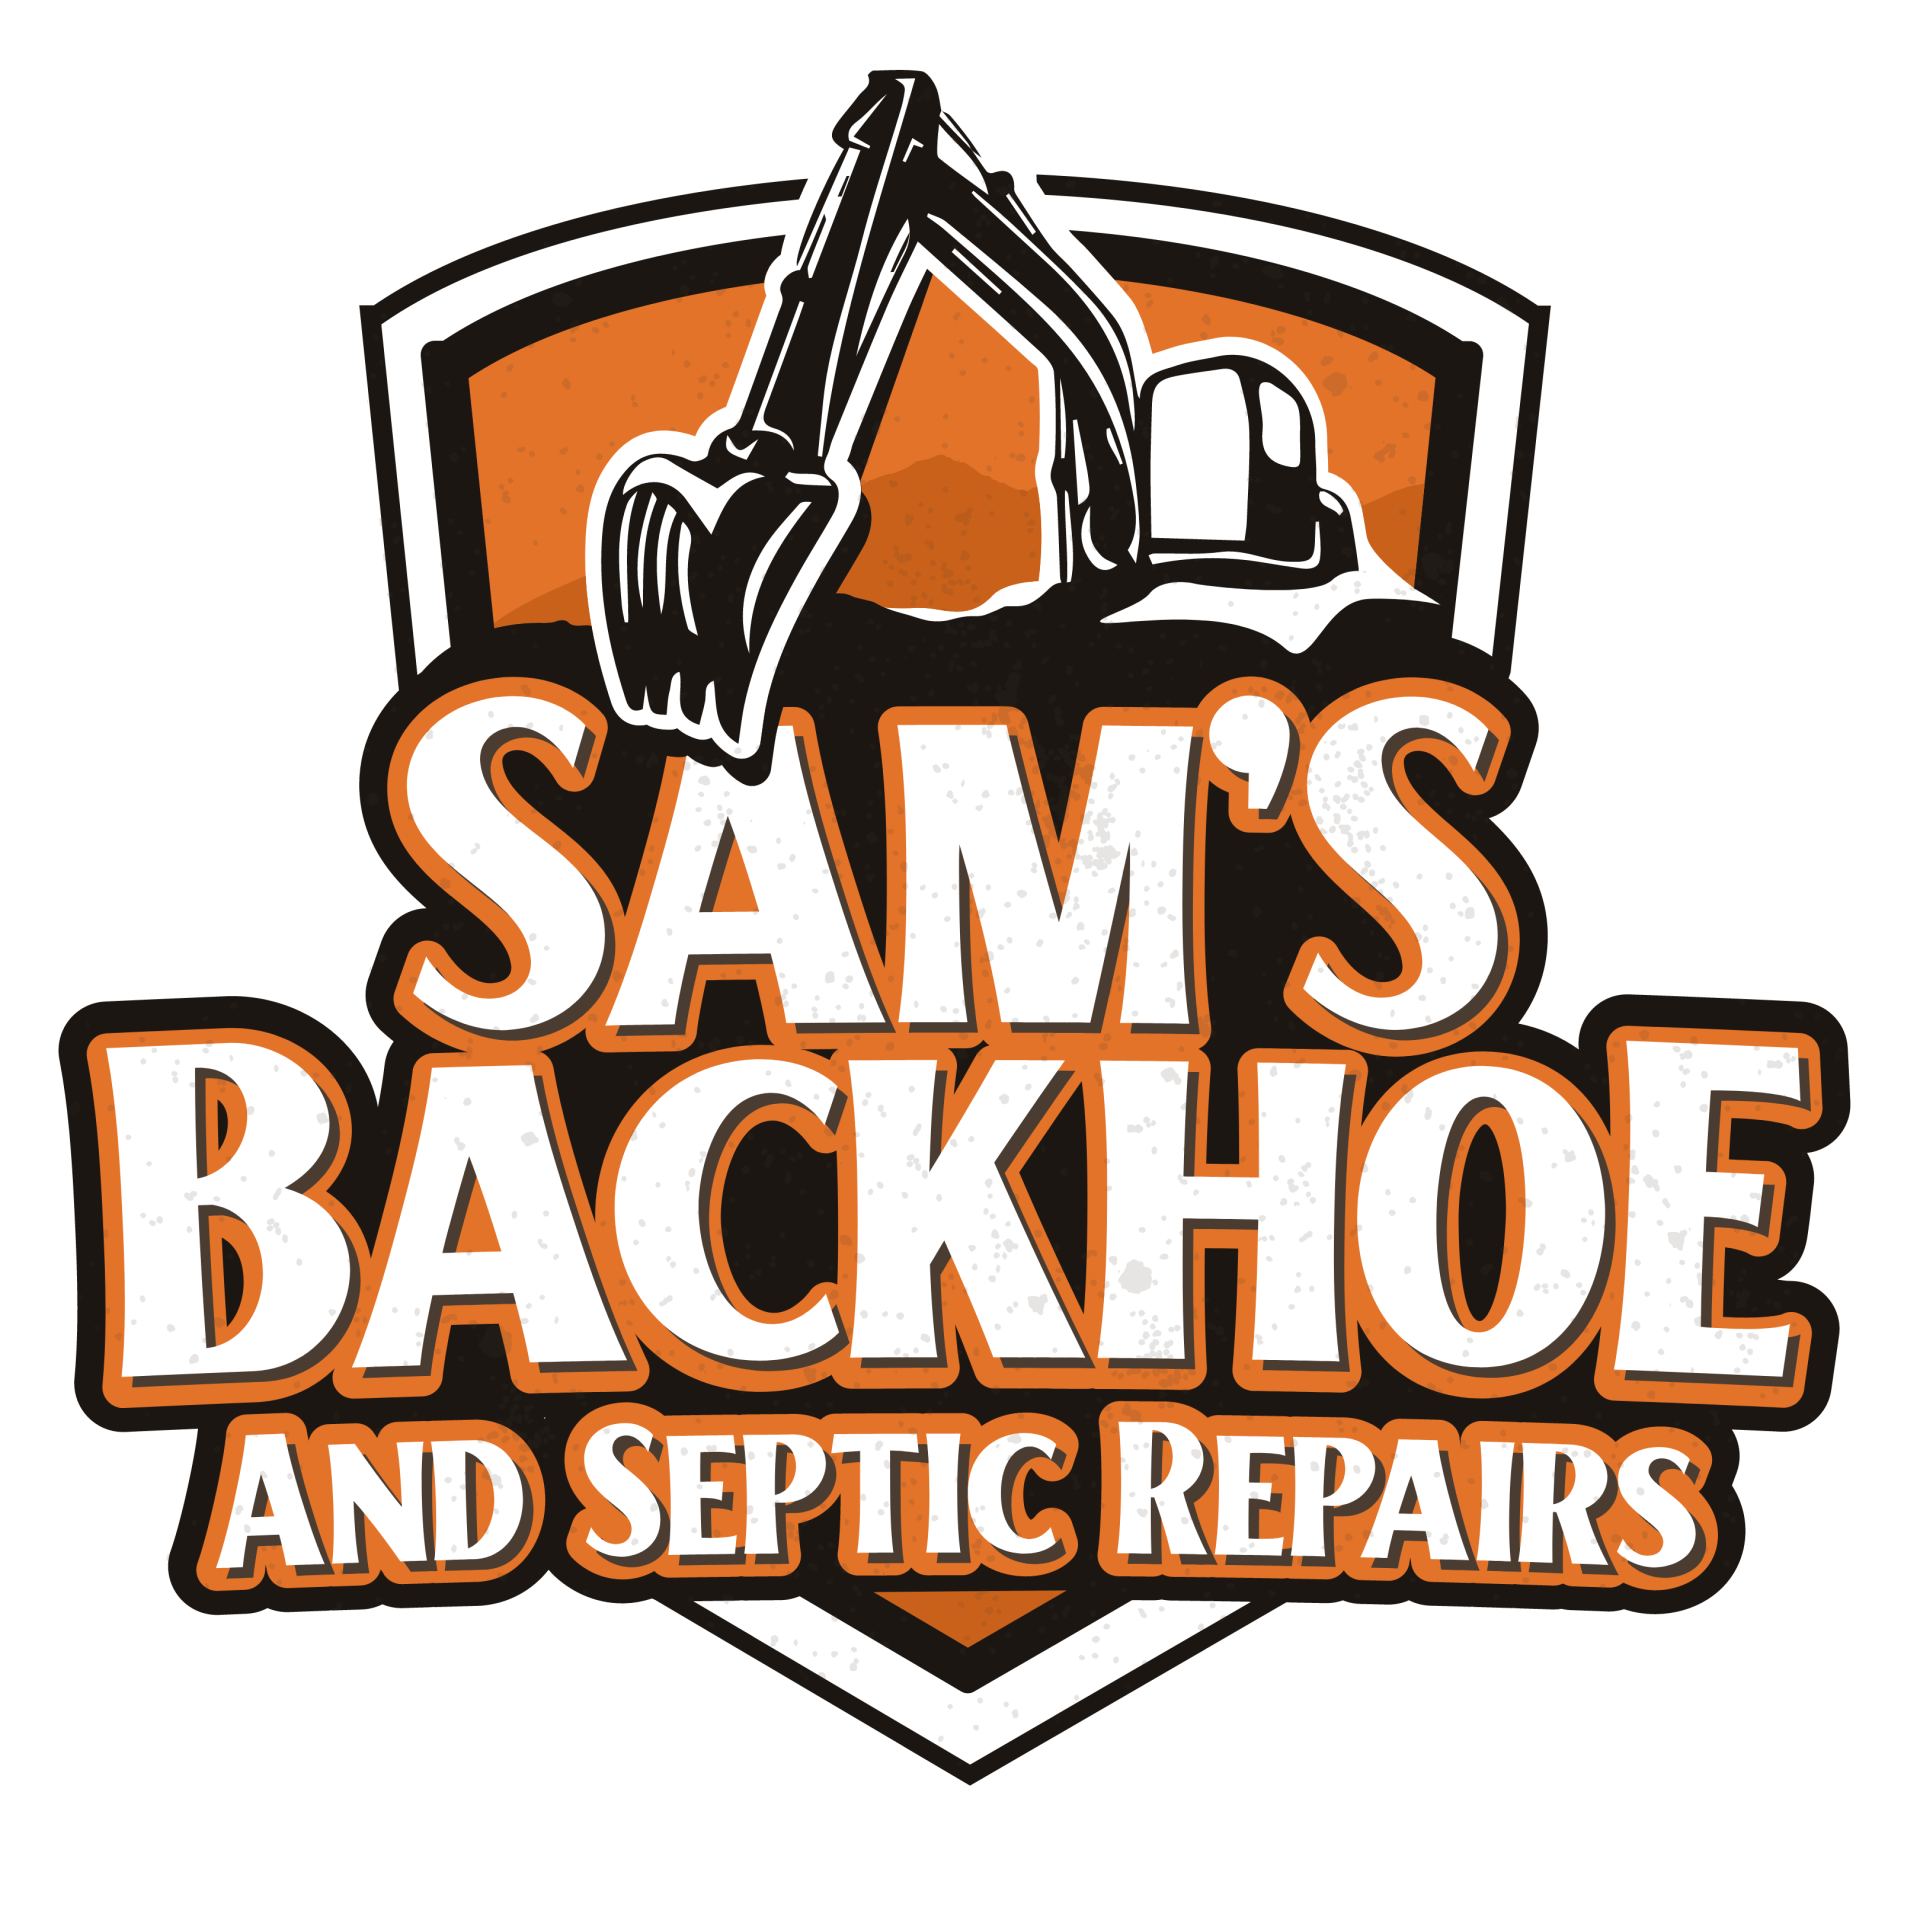 Sam's Backhoe & Septic Repairs in Wrightsville, Pa